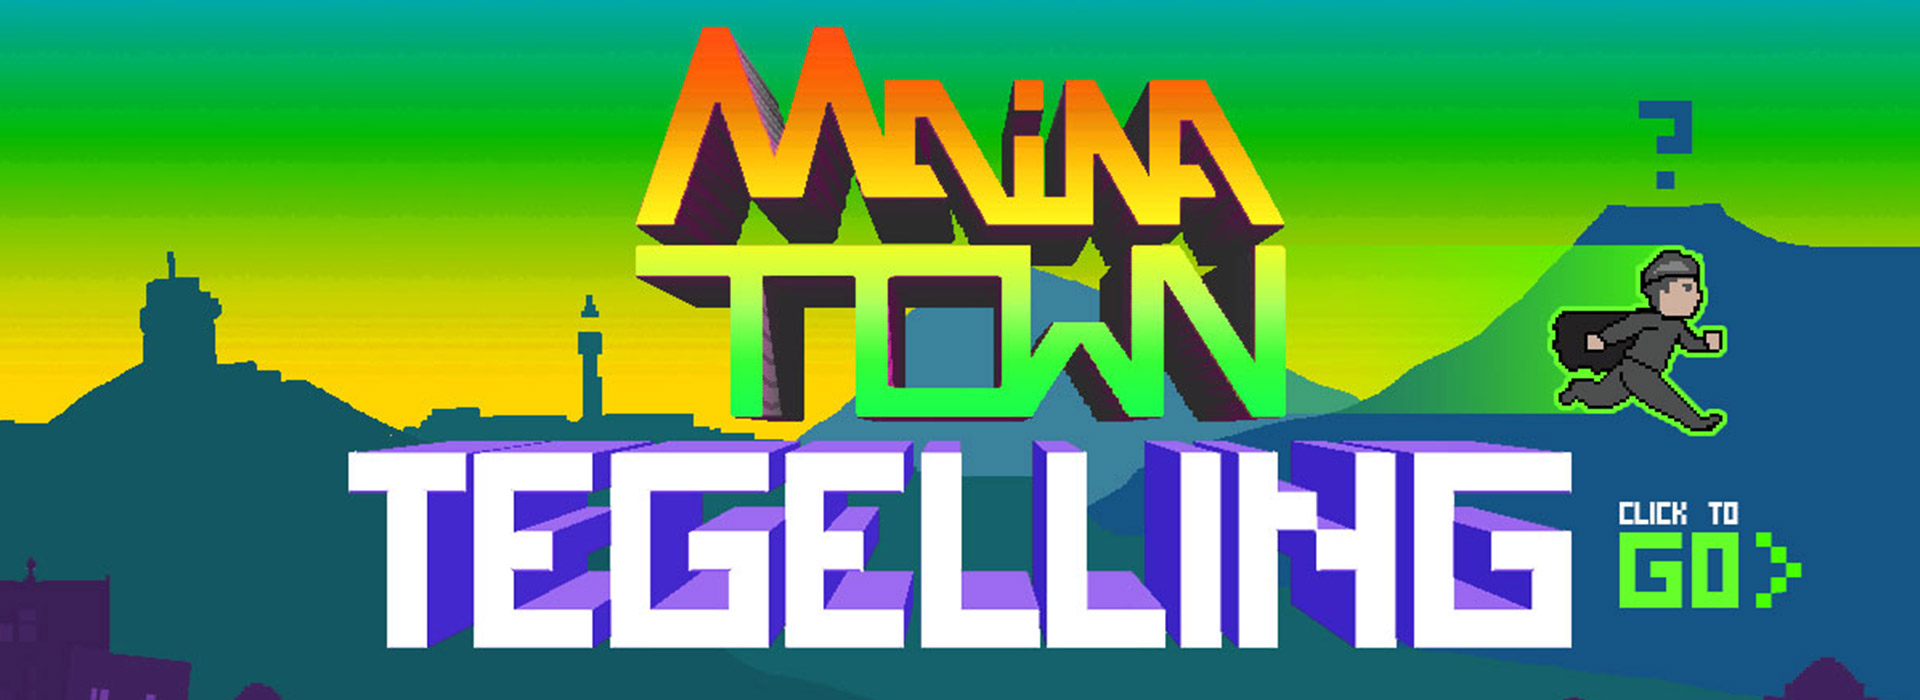 Tegelling in Maina Town